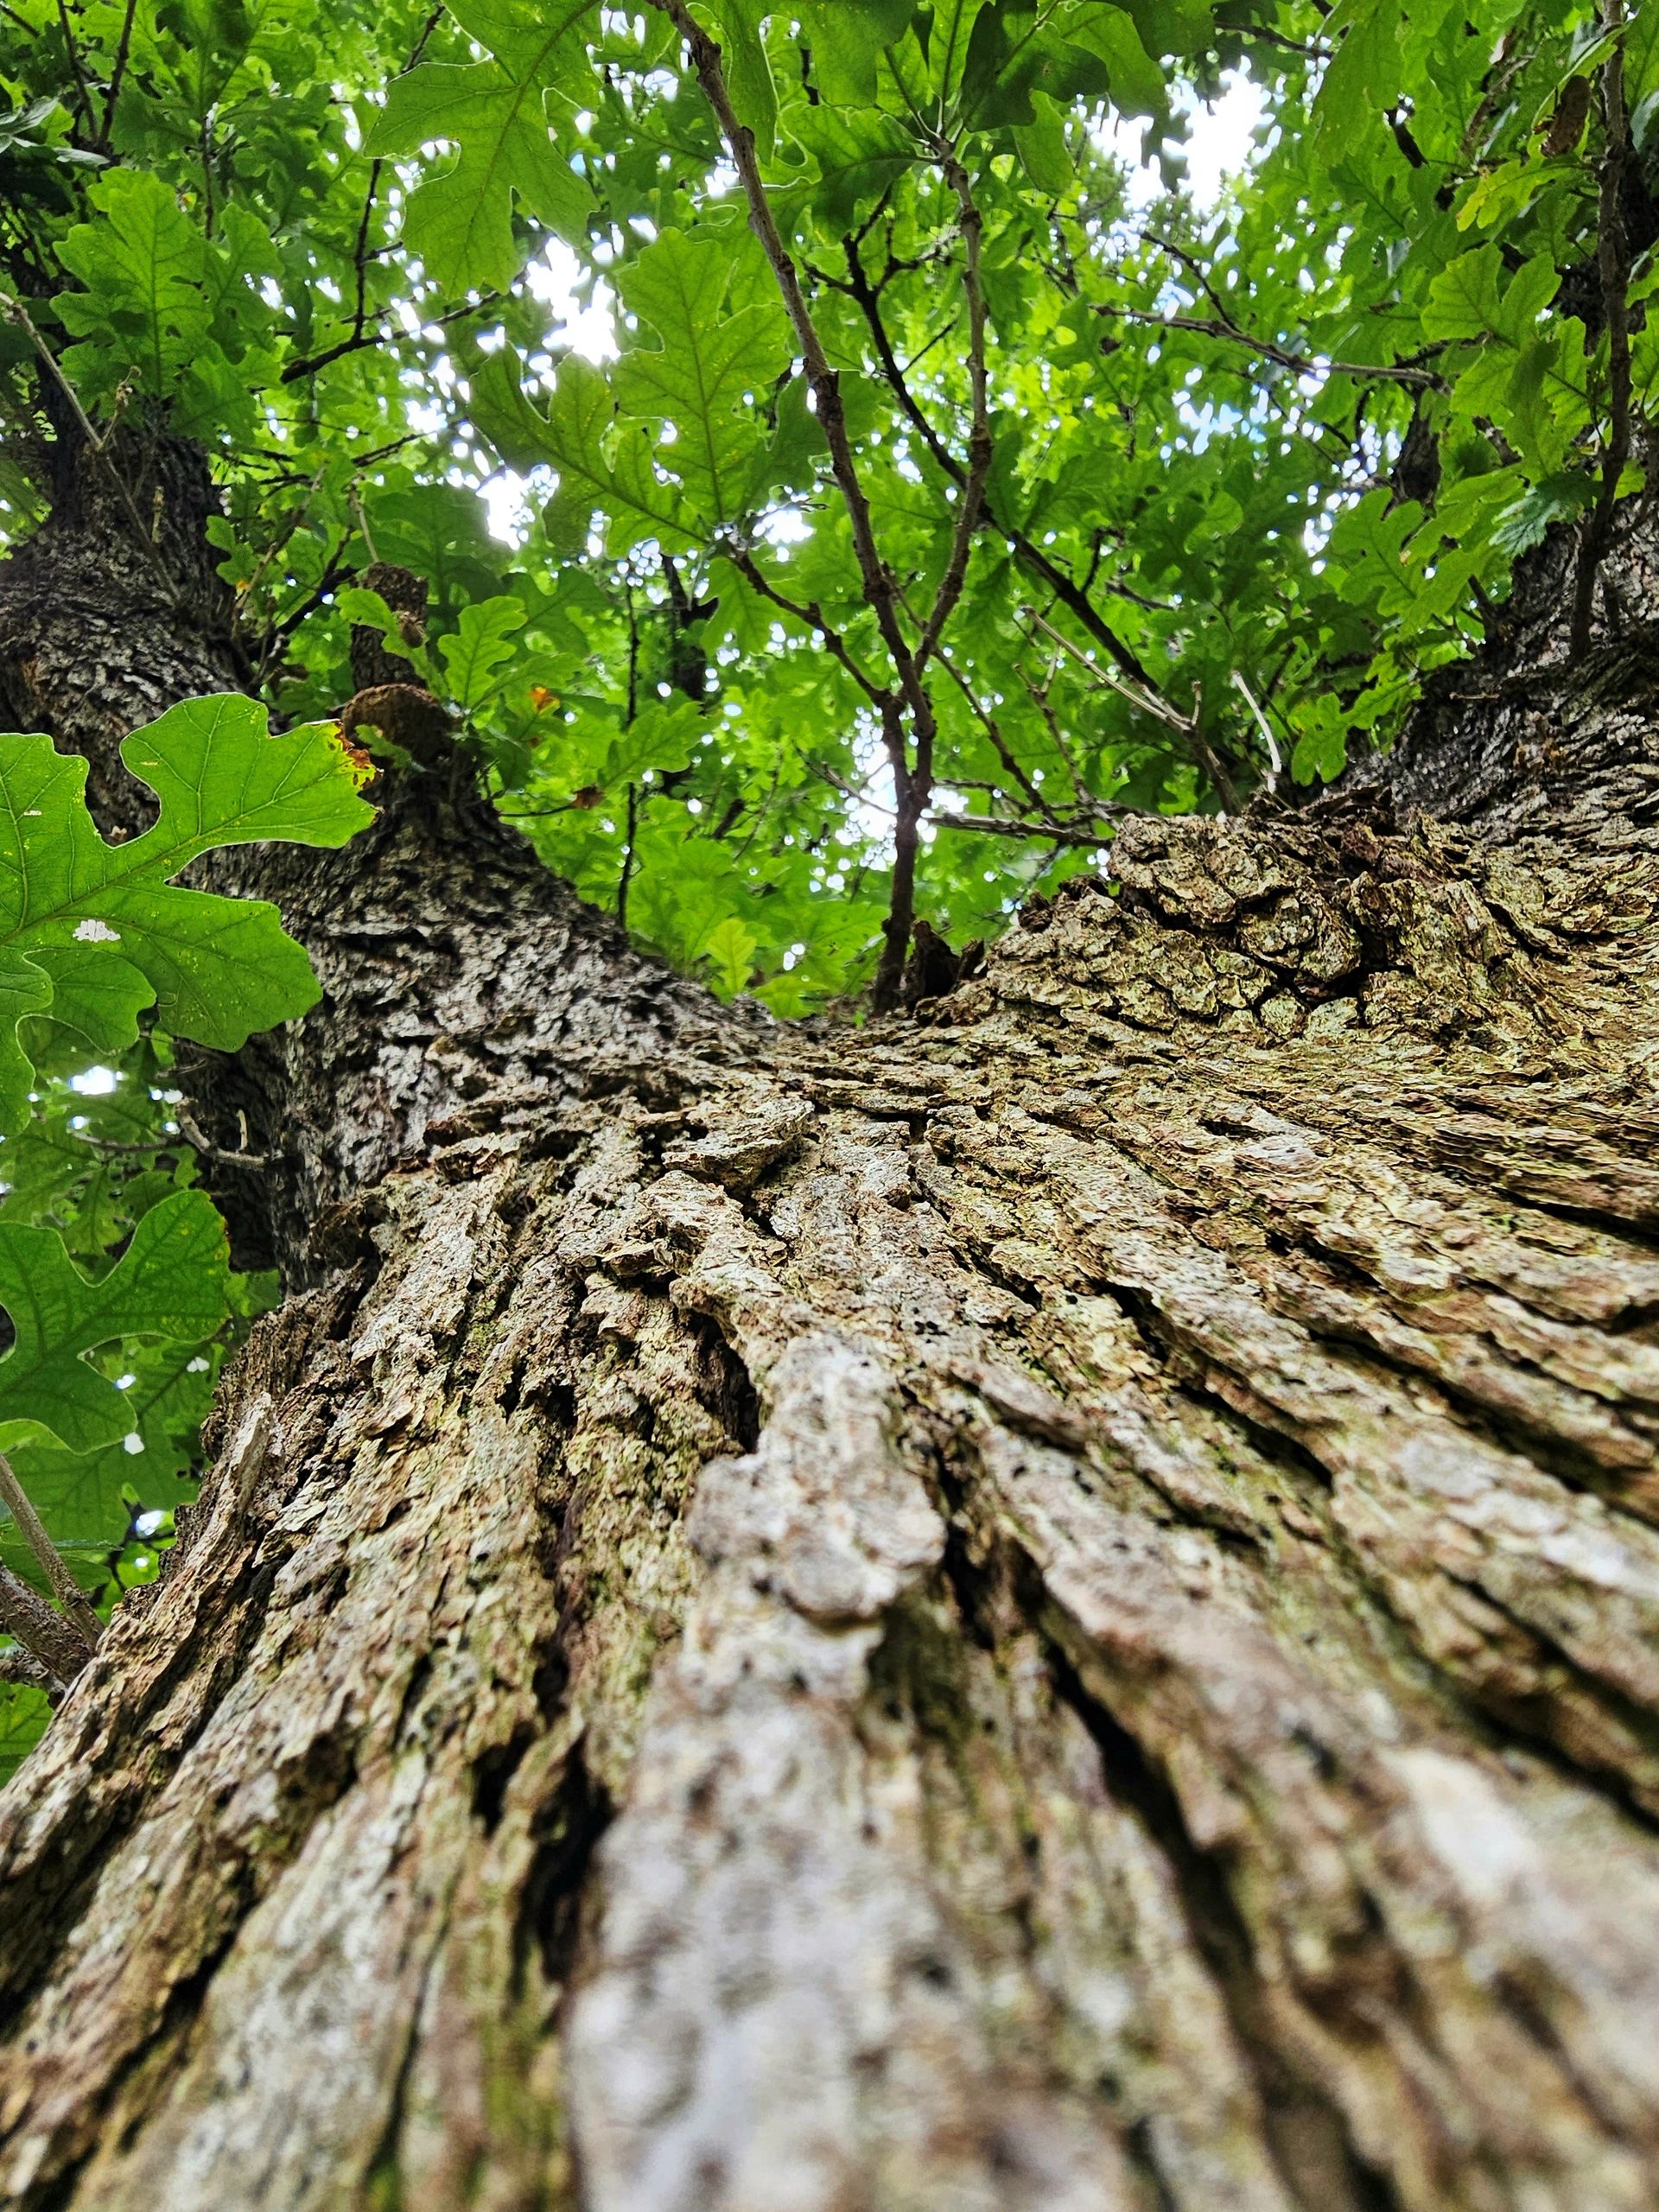 Looking up through a tree.